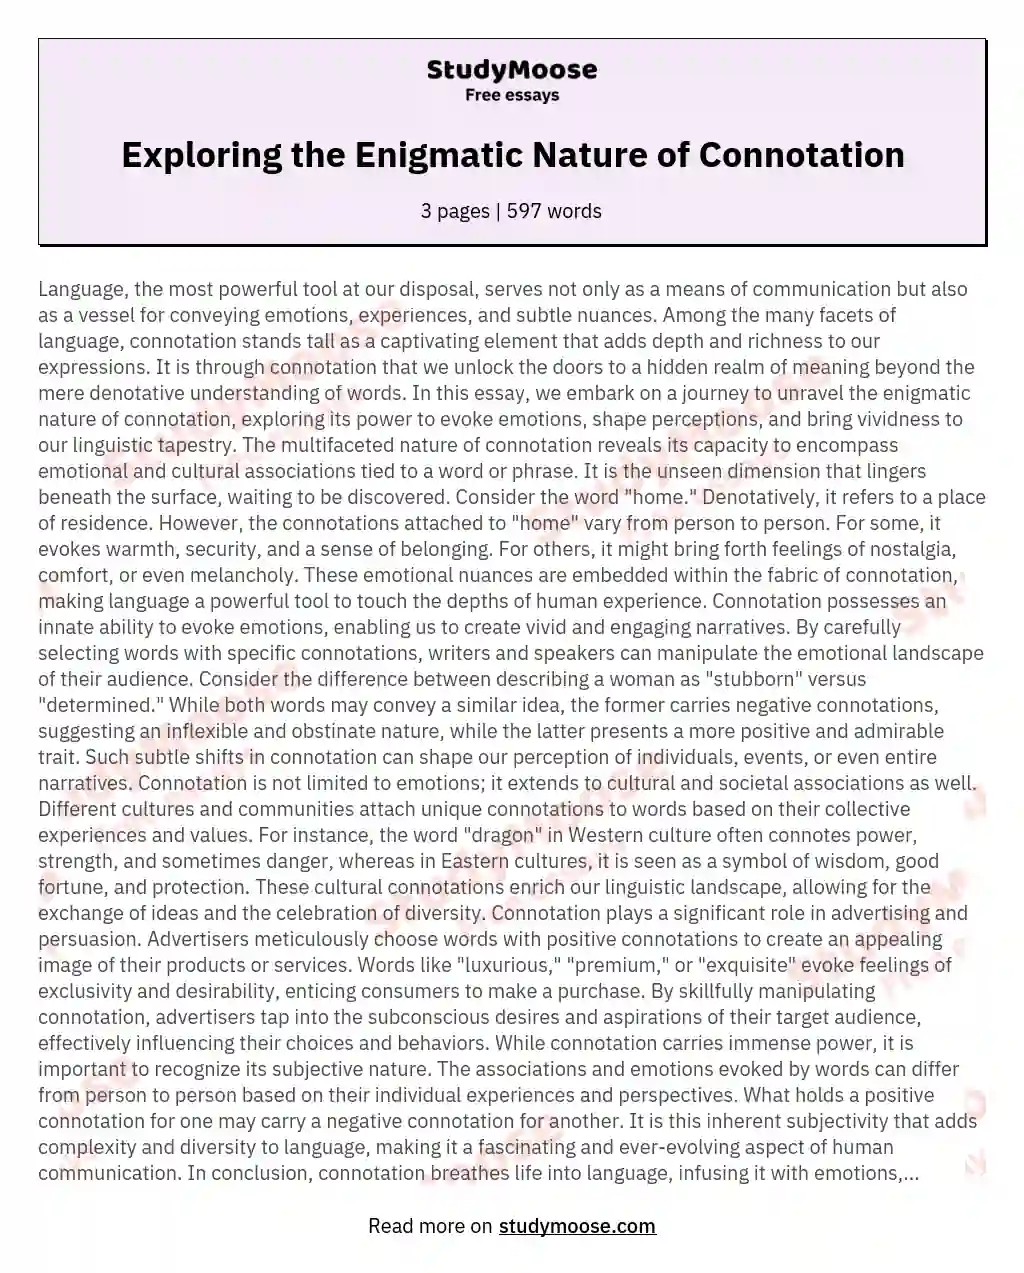 Exploring the Enigmatic Nature of Connotation essay